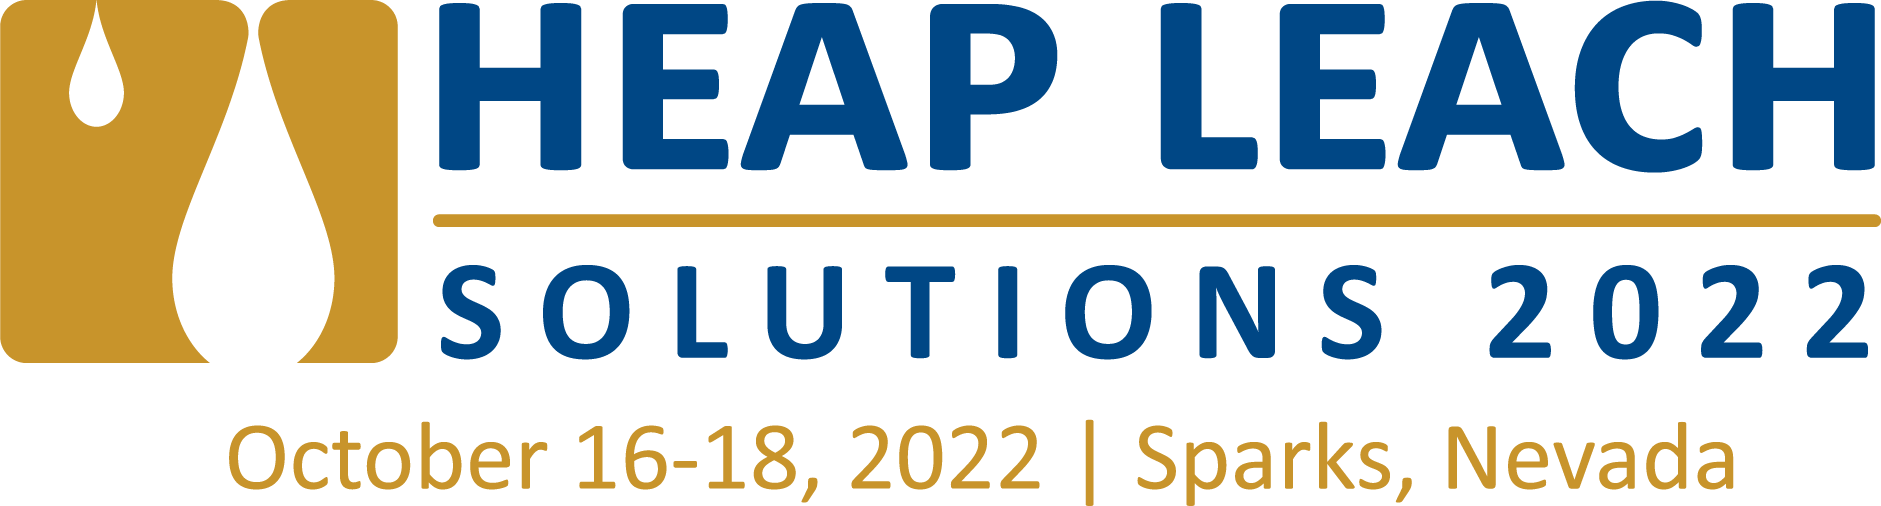 Heap Leach Solutions Conference